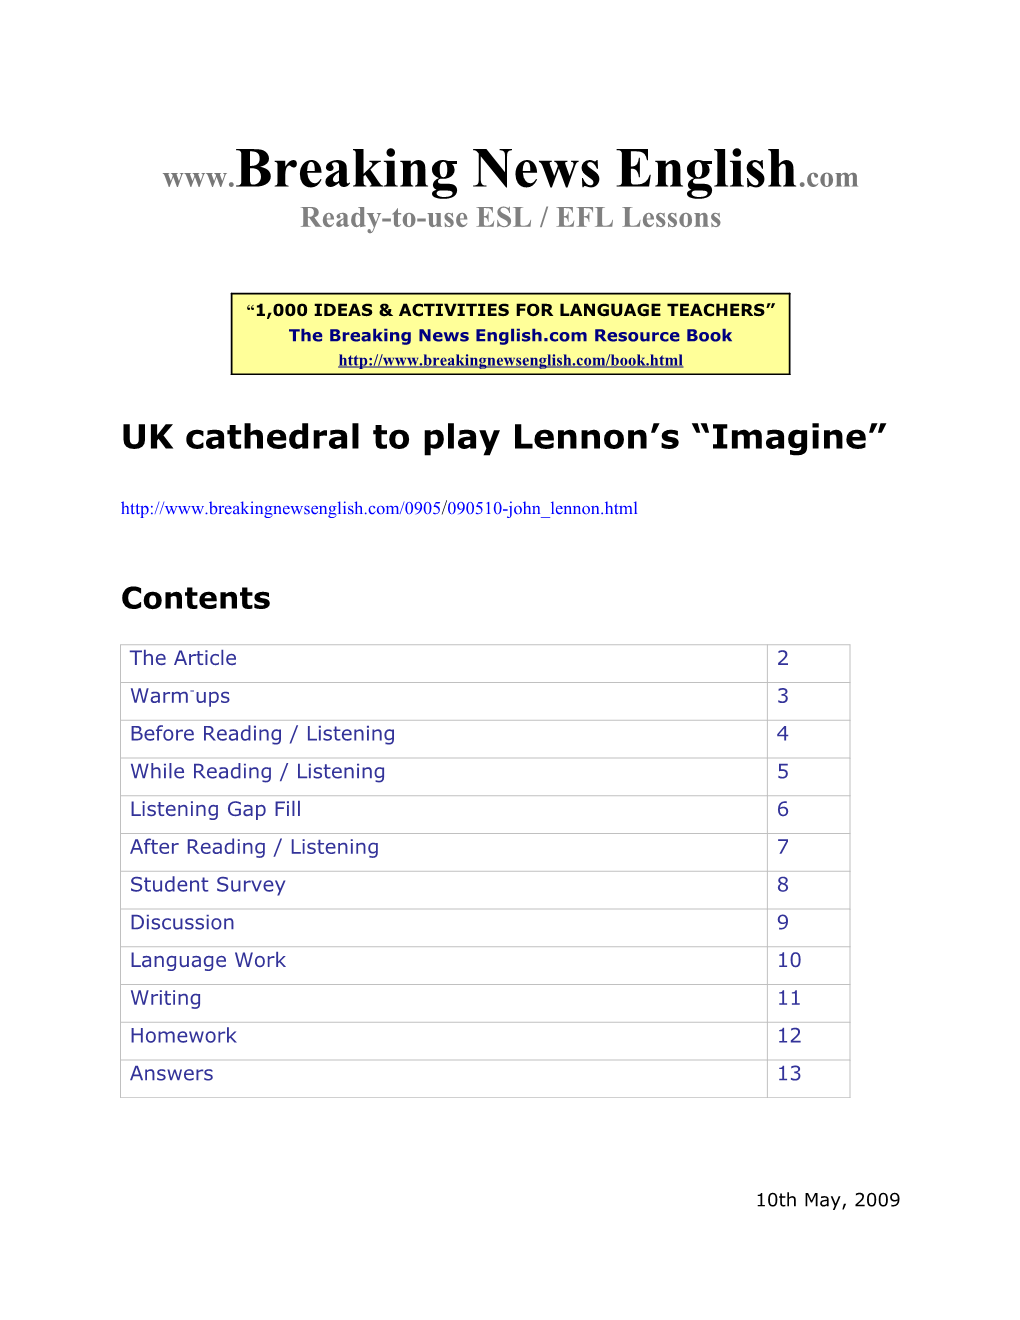 ESL Lesson: UK Cathedral To Play Lennon’S “Imagine”